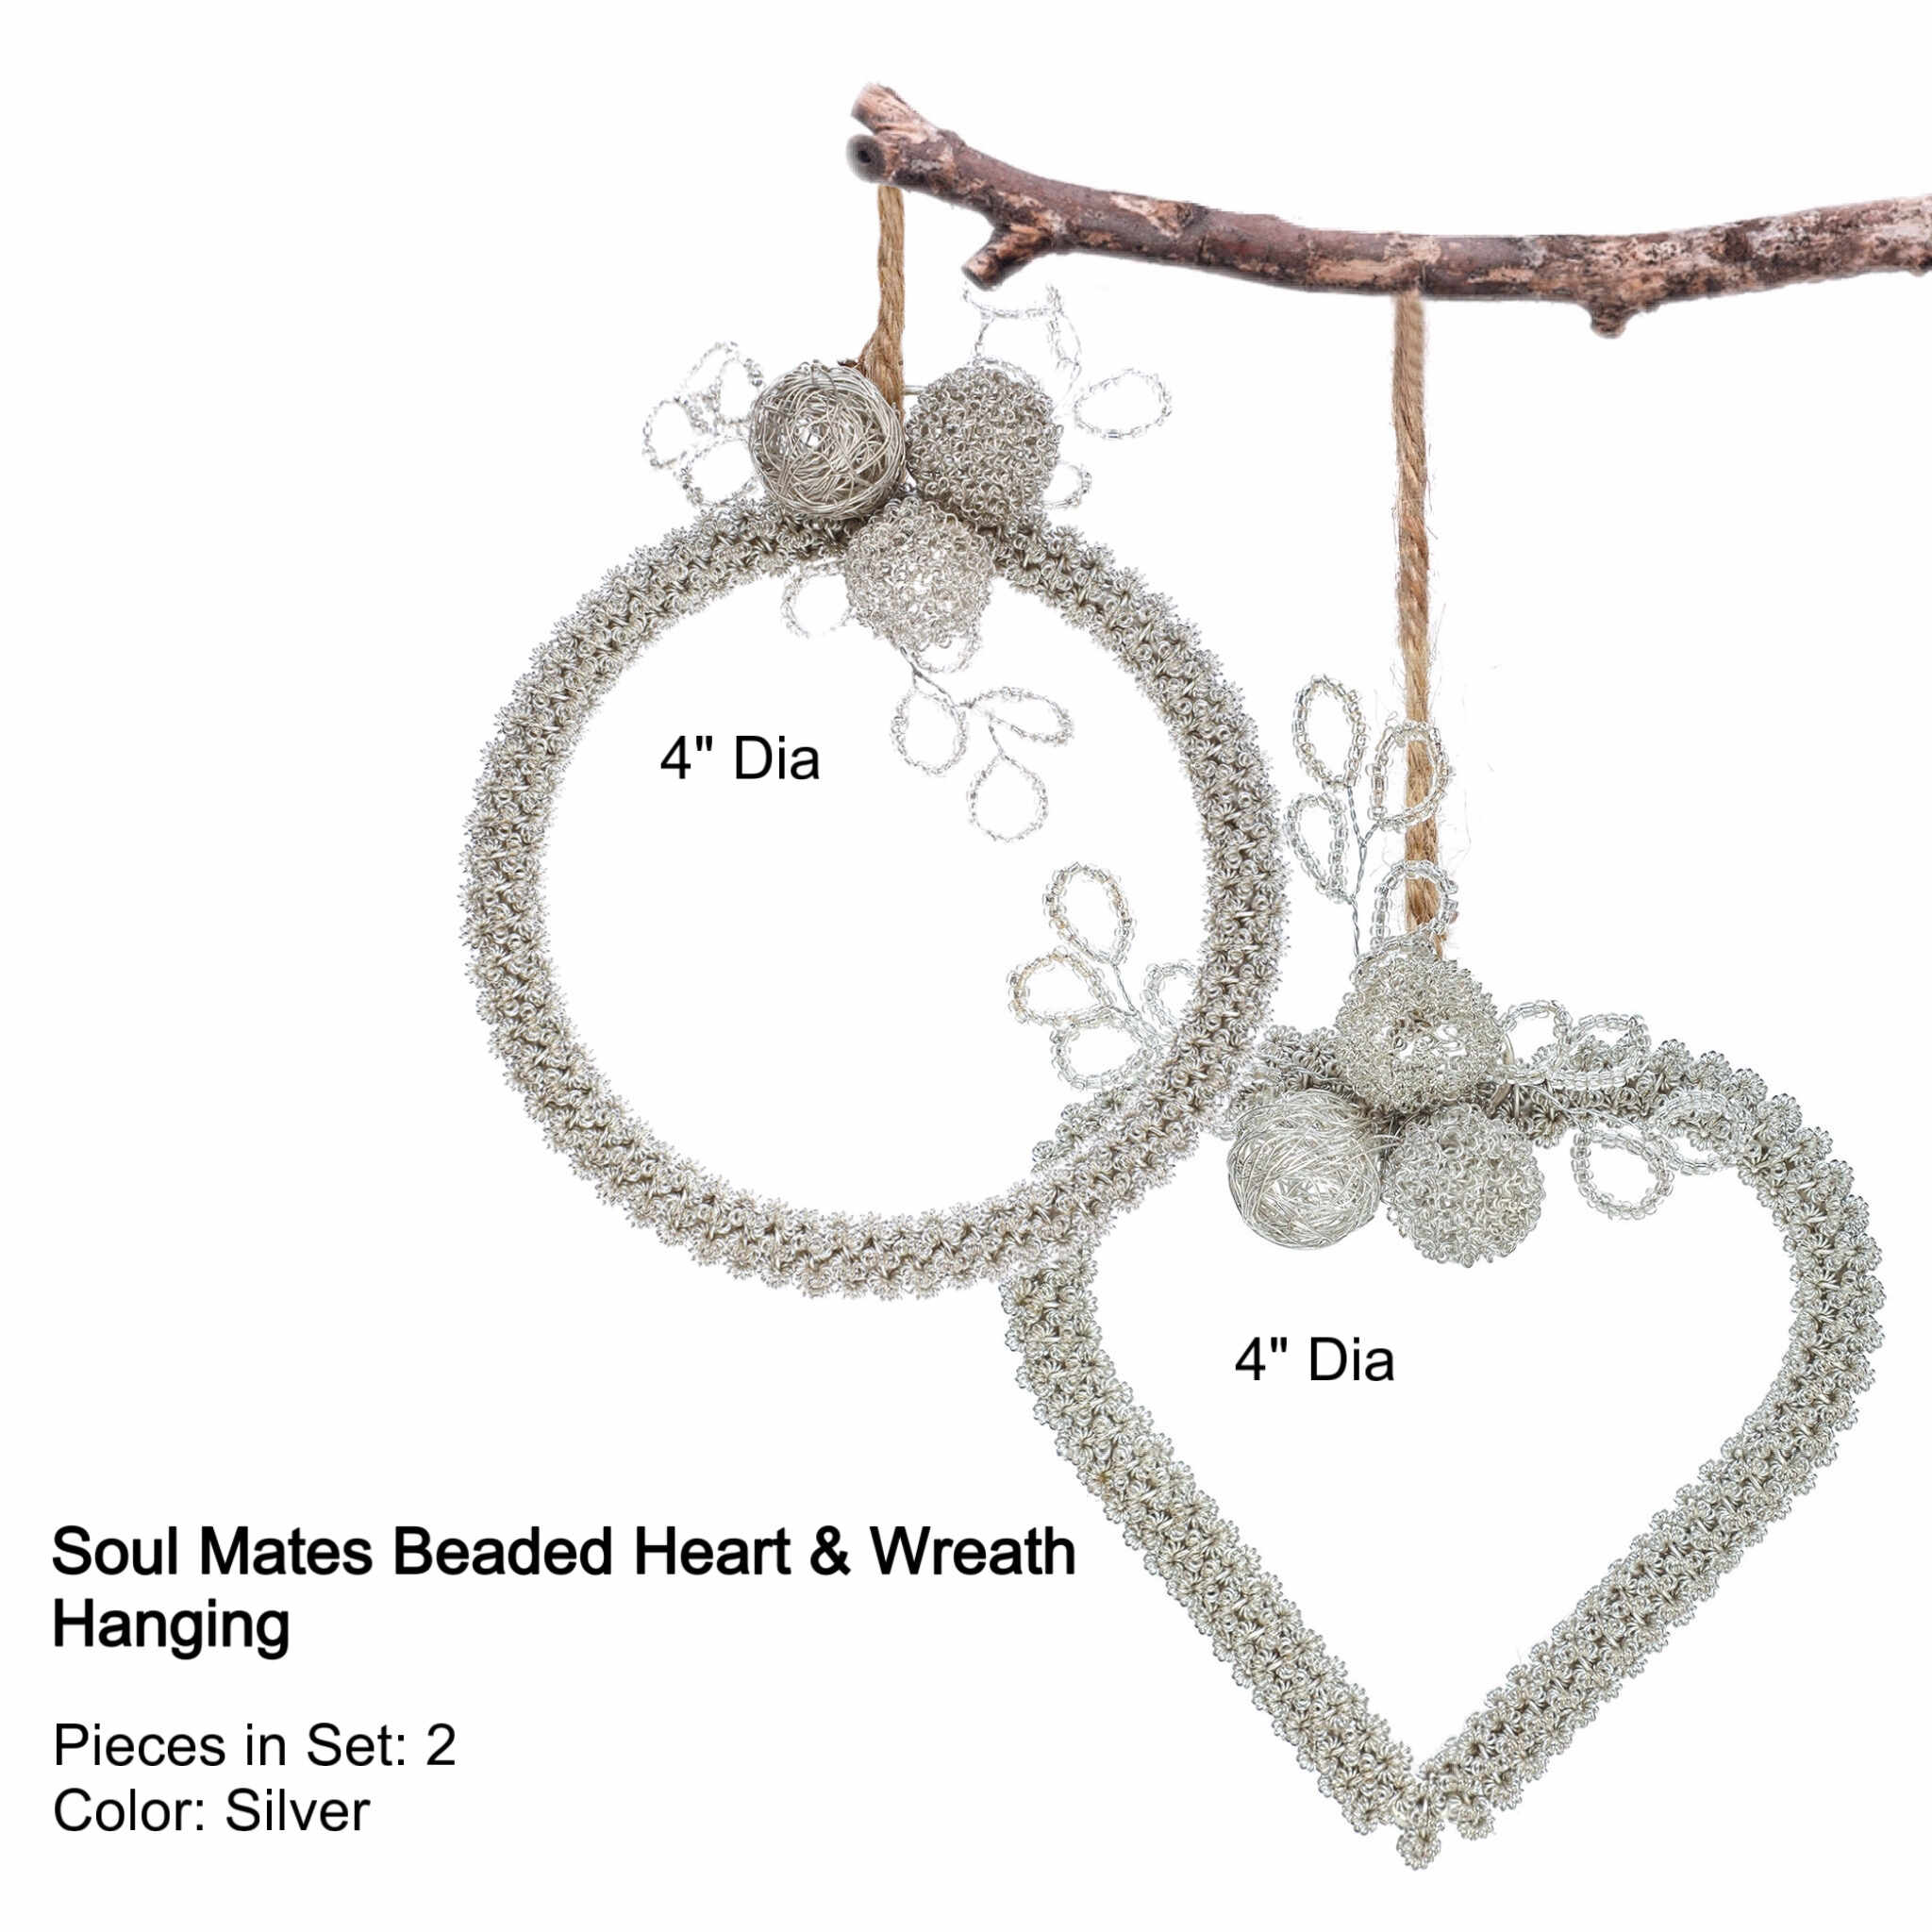 Soul Mates Beaded Heart & Wreath Hanging in Silver, Set of 2